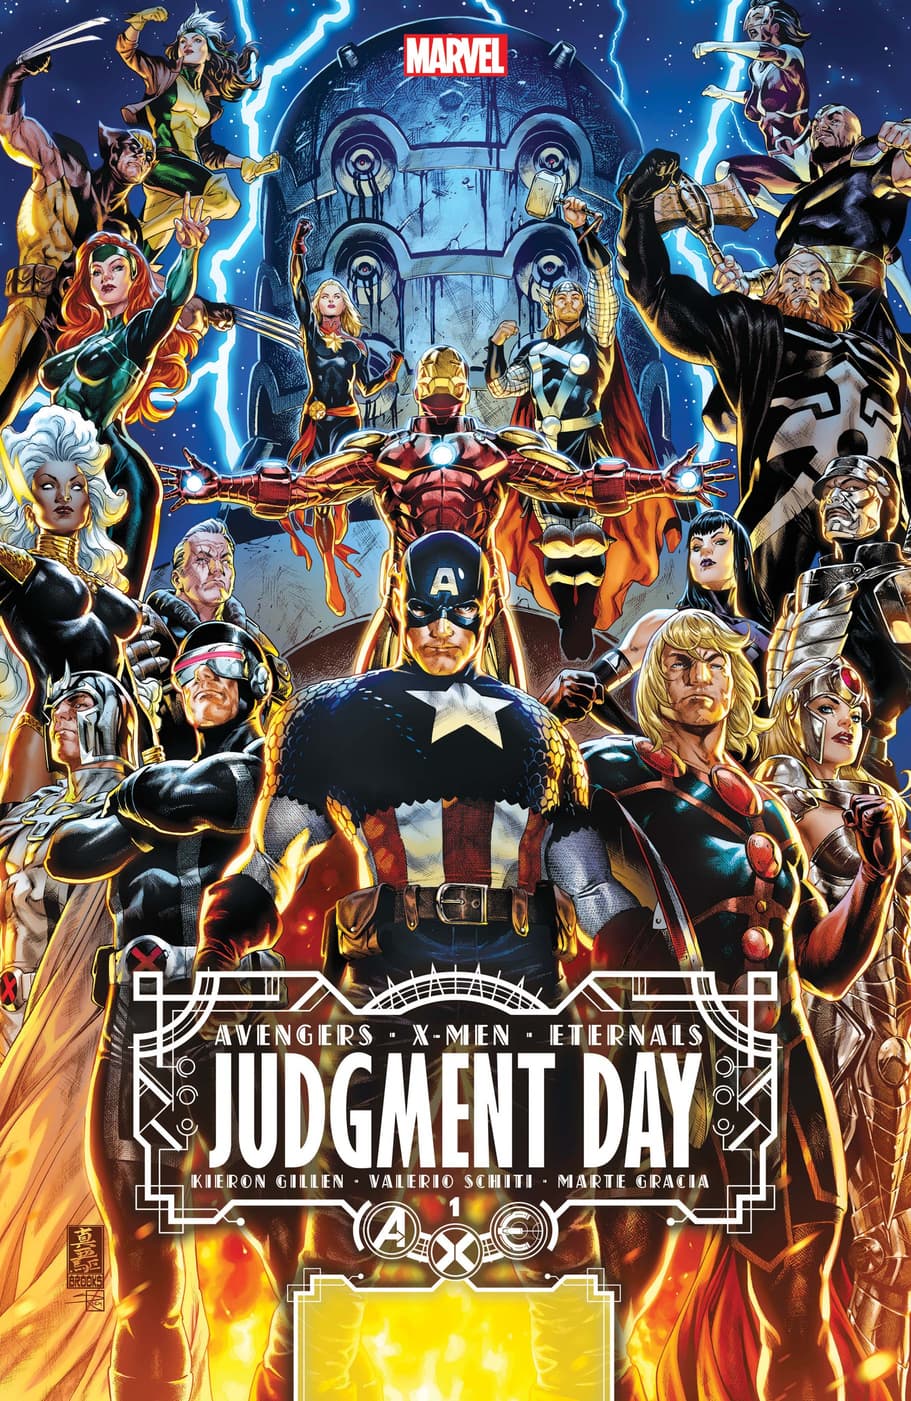 A.X.E.: JUDGMENT DAY (2022) #1 cover by Mark Brooks